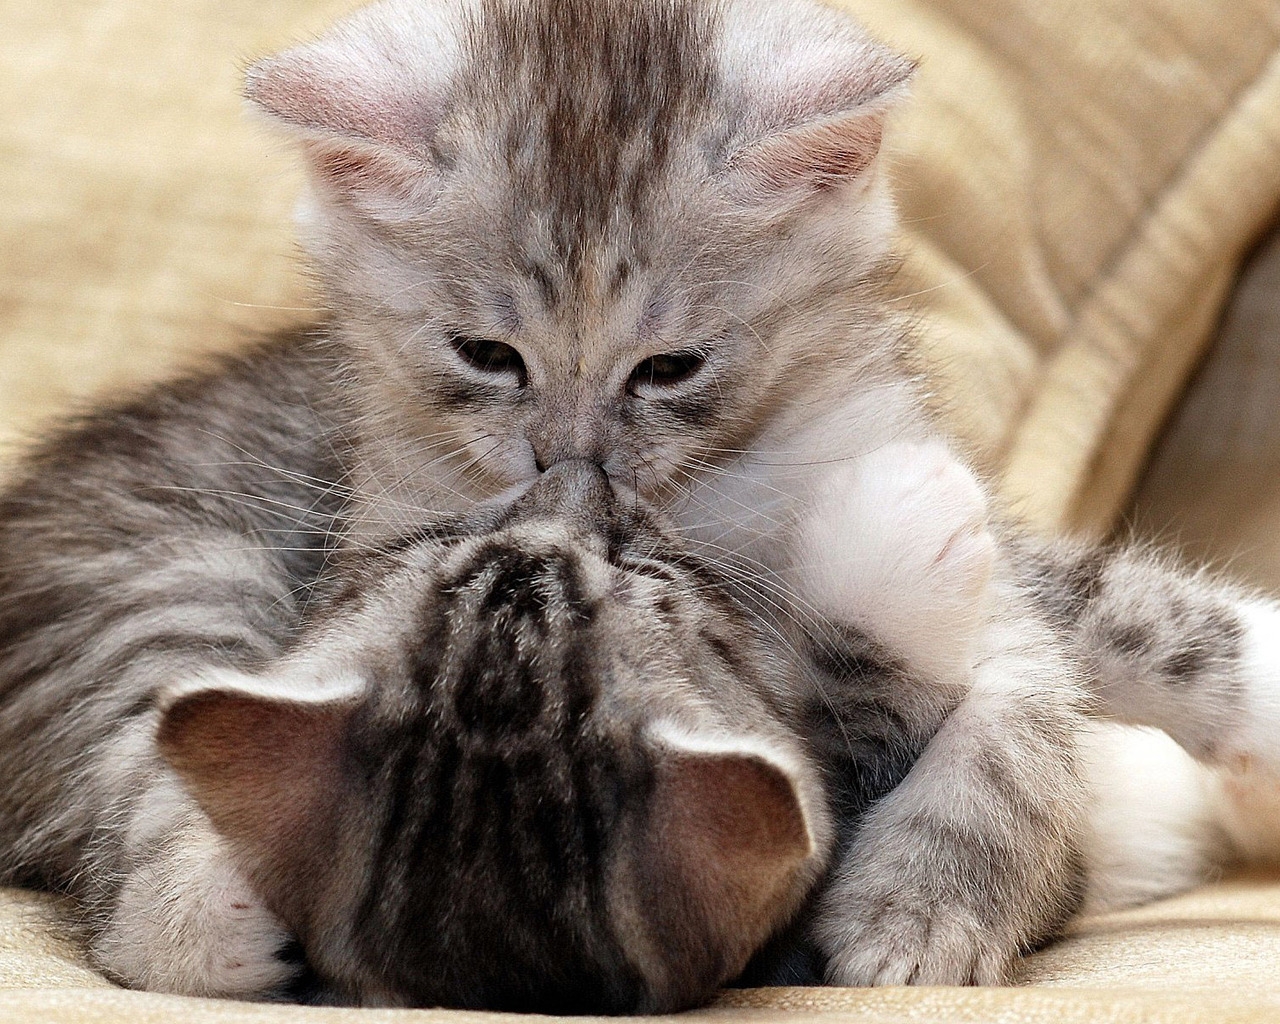 Kitty Kiss for 1280 x 1024 resolution